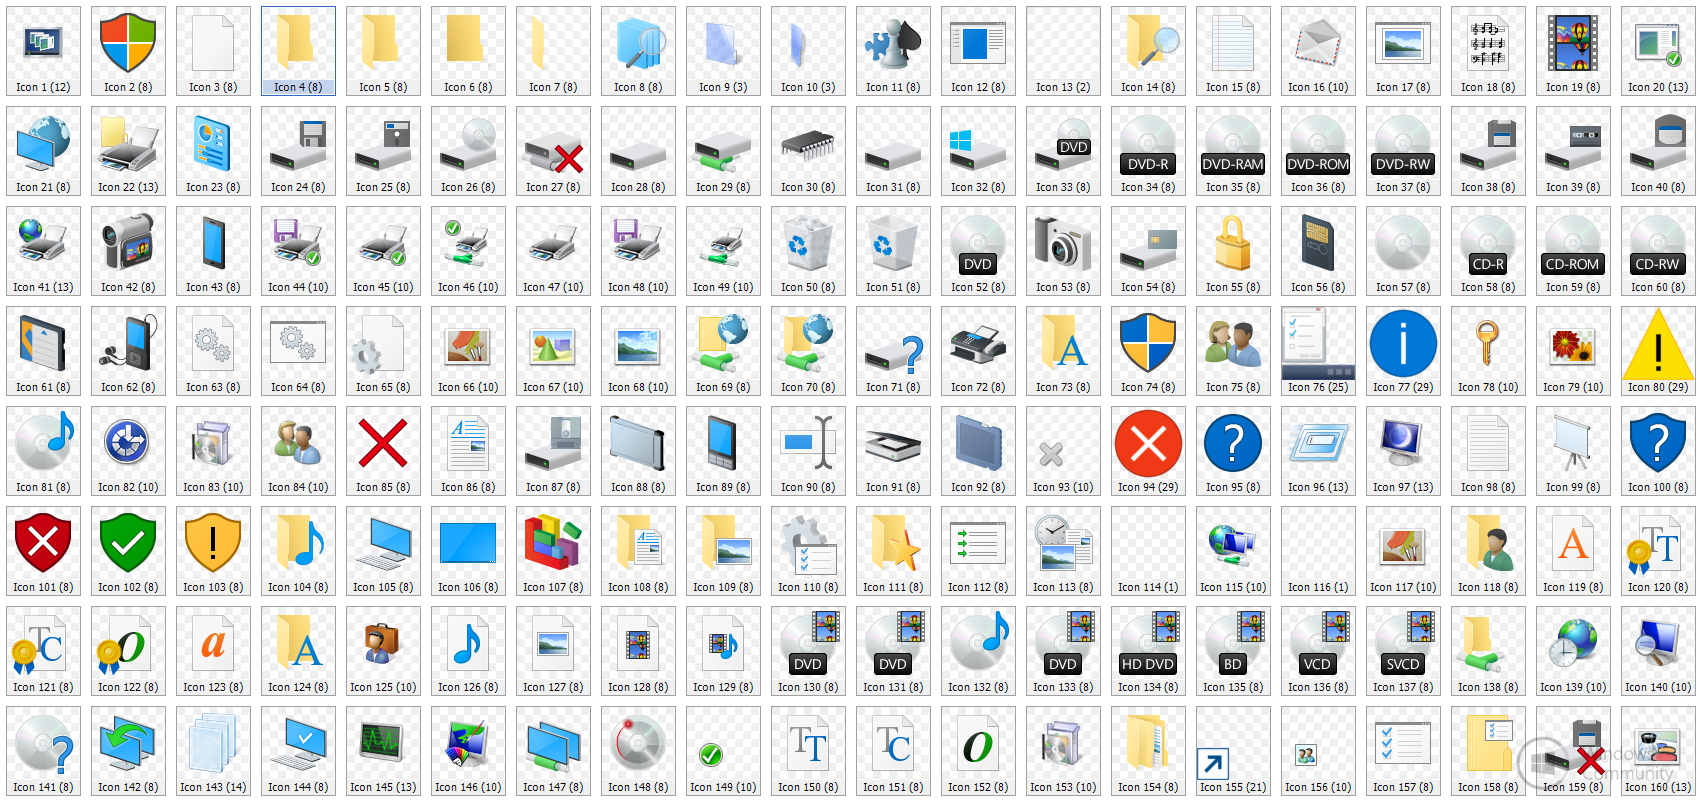 Free icons for windows